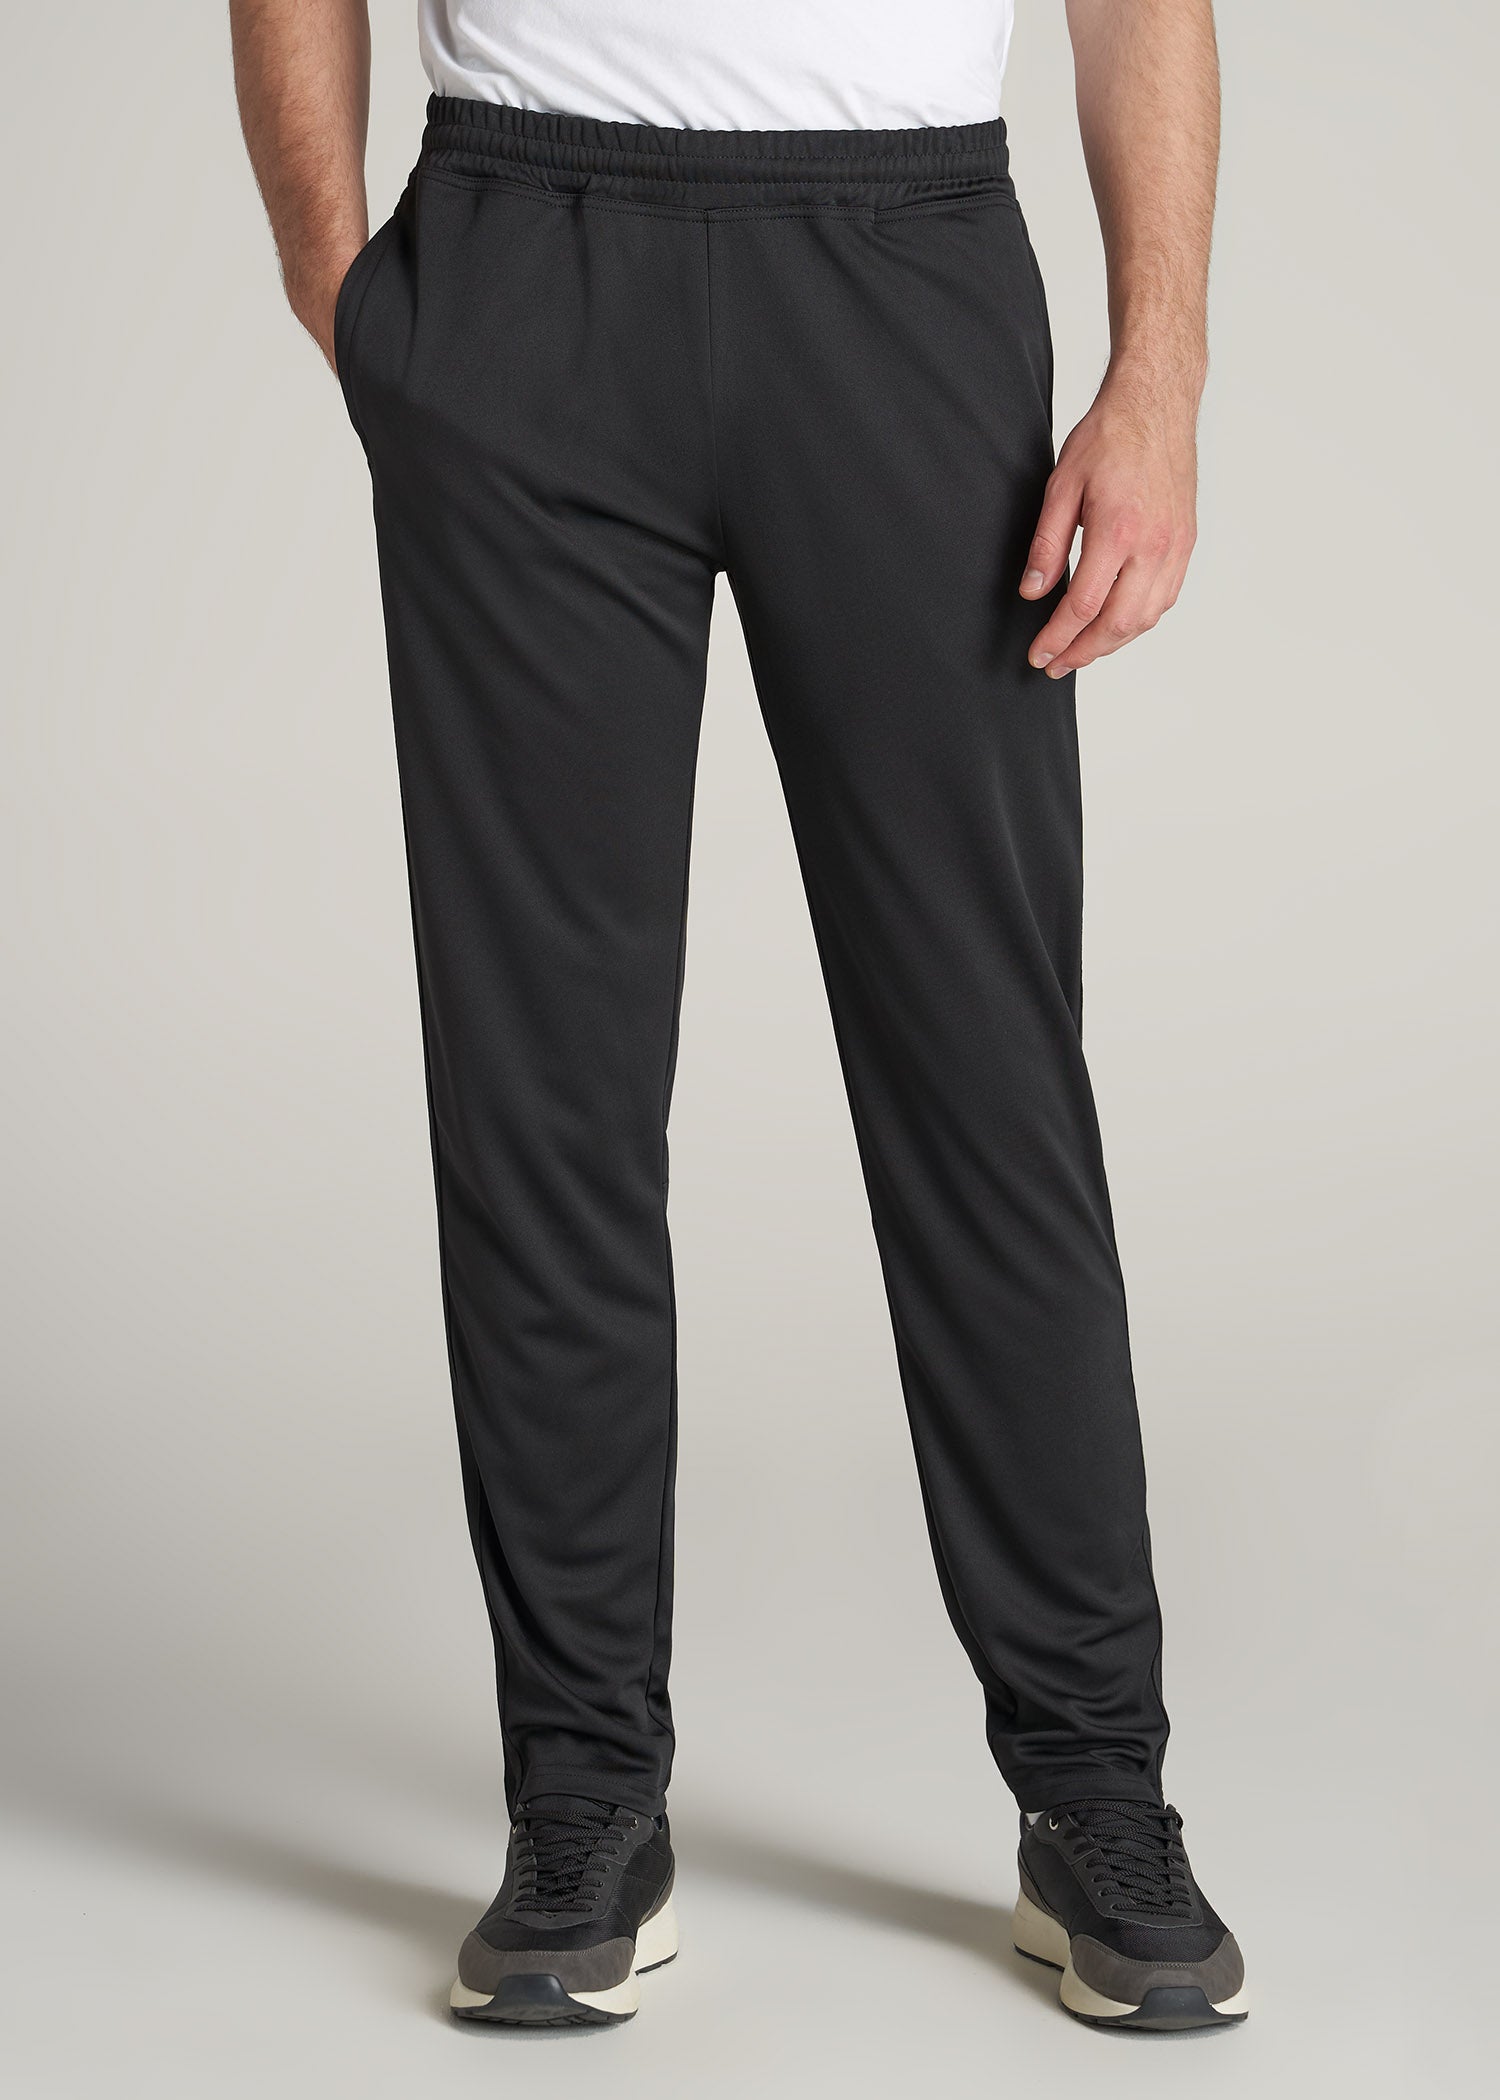 Athletic Stripe Pants for Tall Men in Black And Black